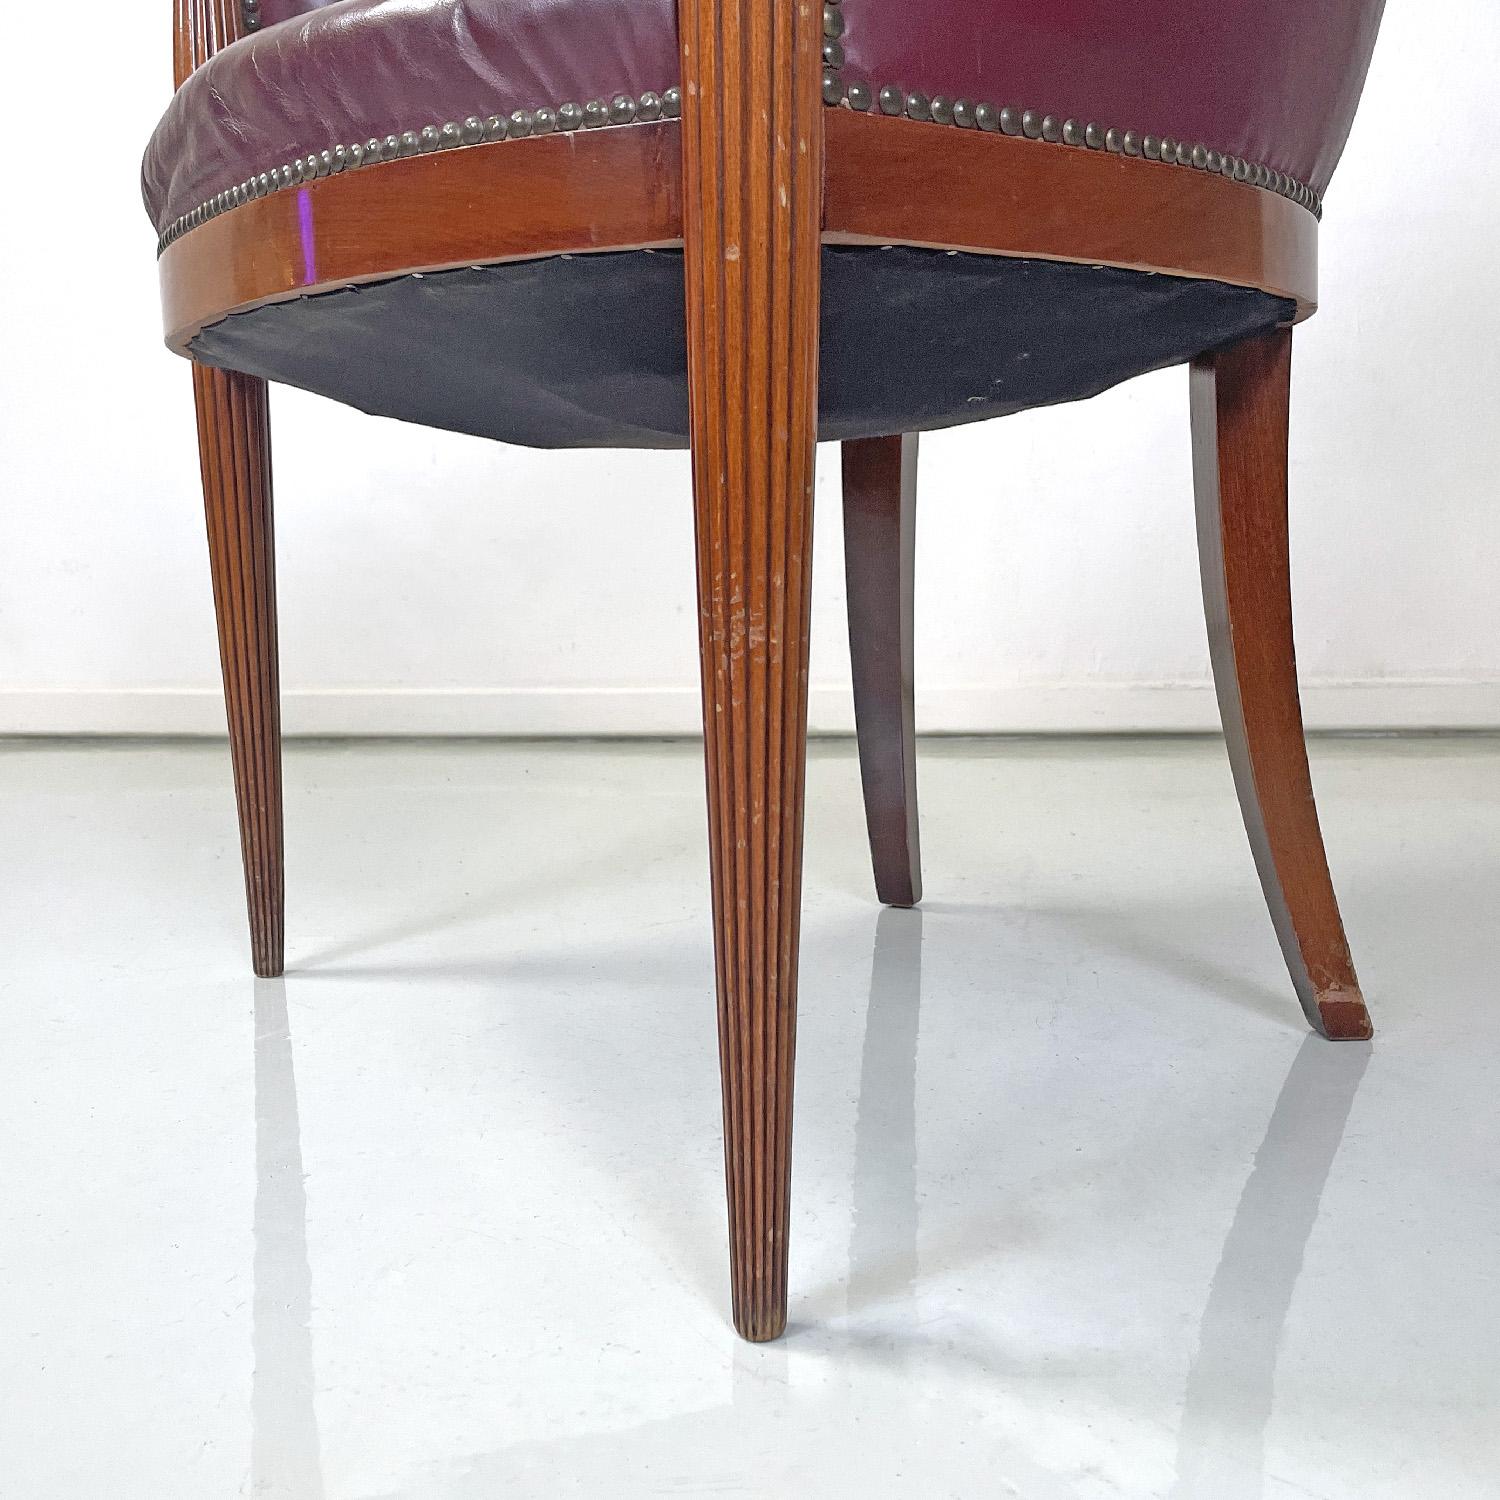 Italian mid-century modern wine-colored leather armchair with studs, 1950s For Sale 4